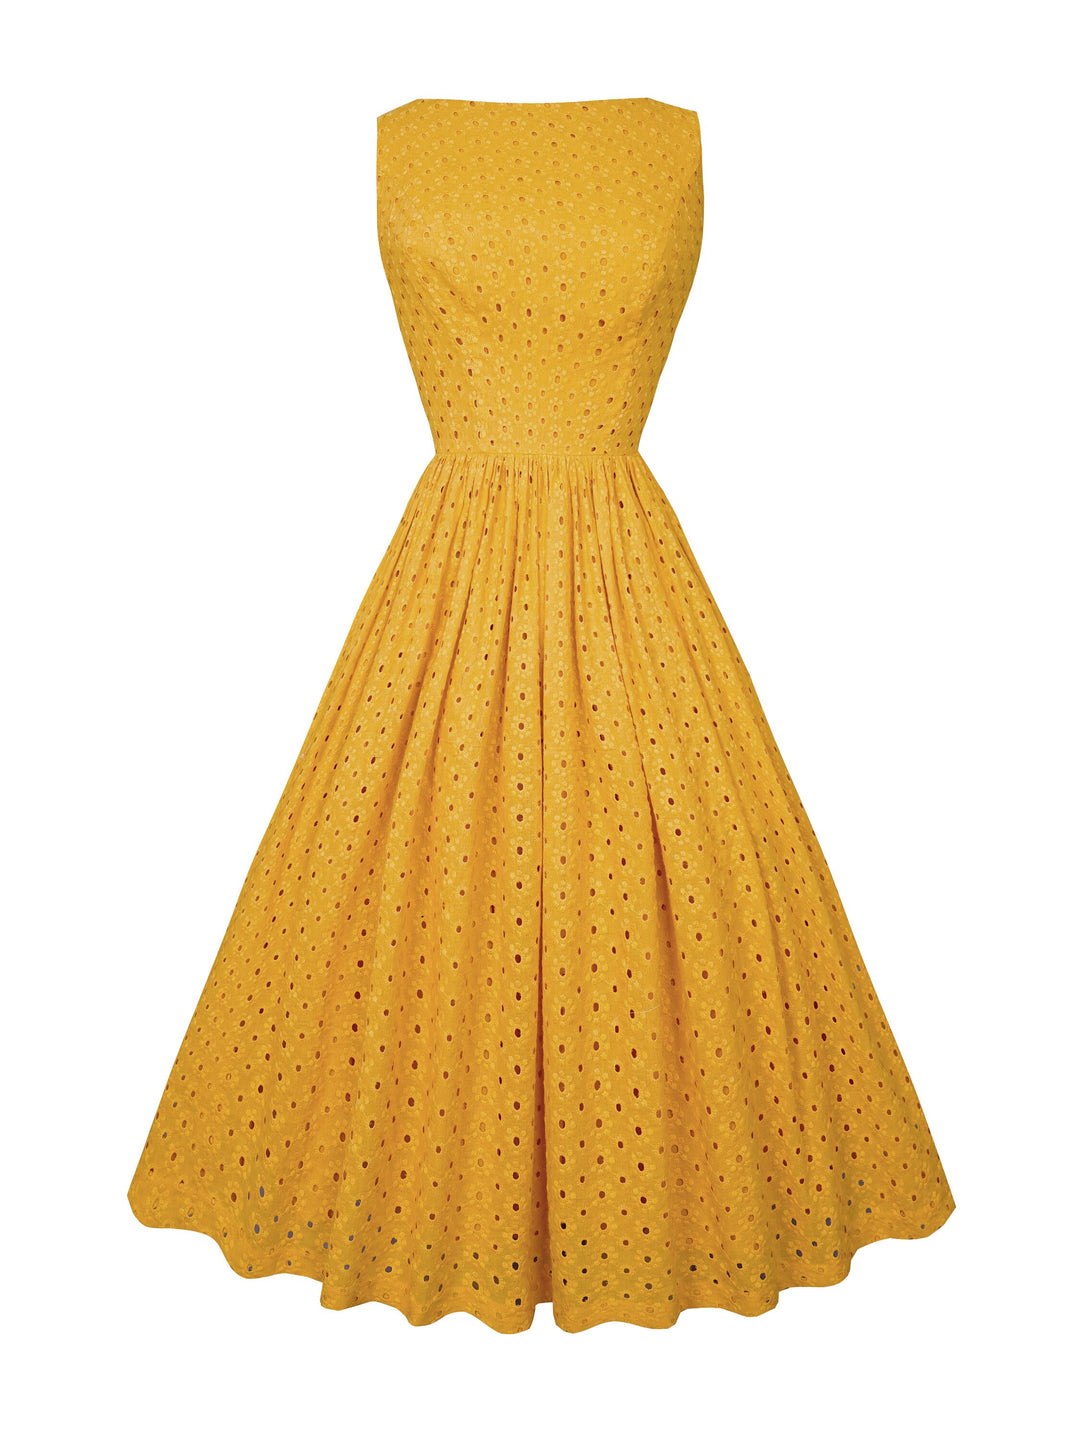 Fabric Mustard "In Bloom" Eyelet - By the Yard